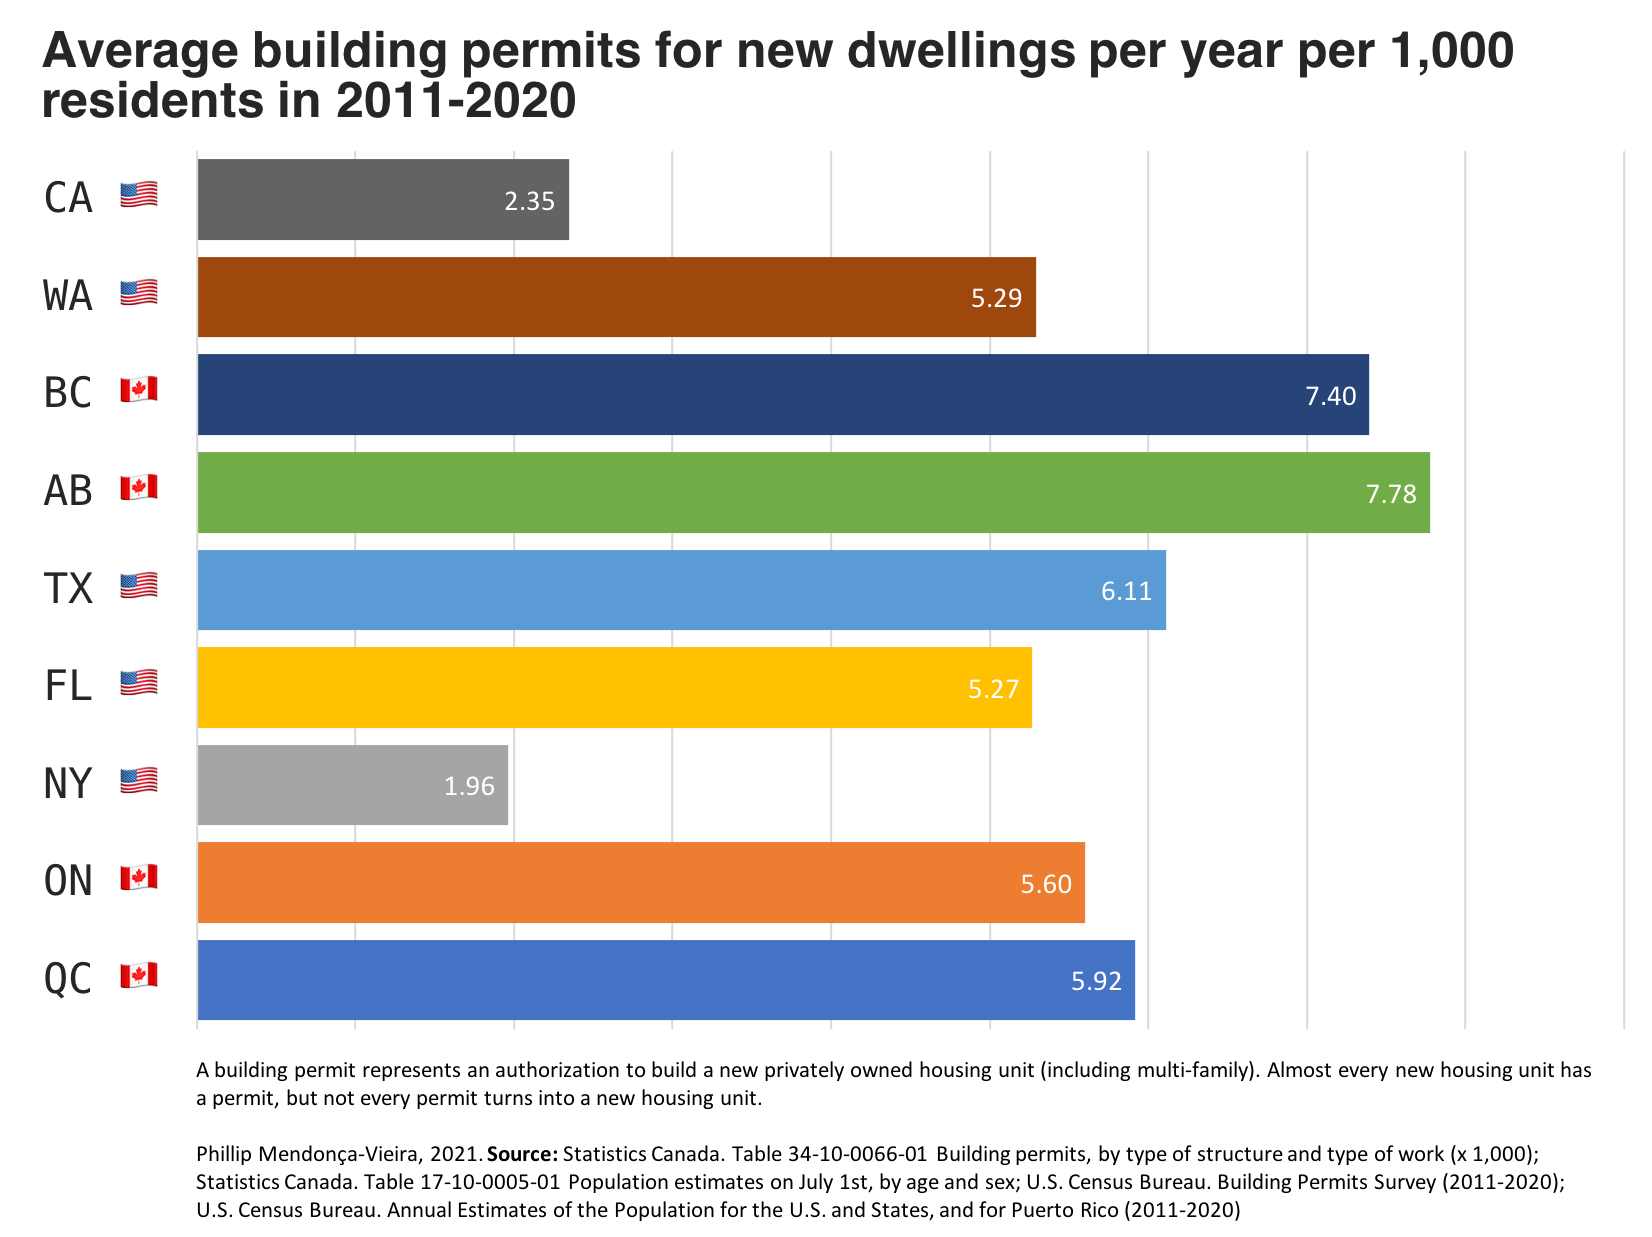 Average building permits for new dwellings per year per 1,000 residents in 2011-2020